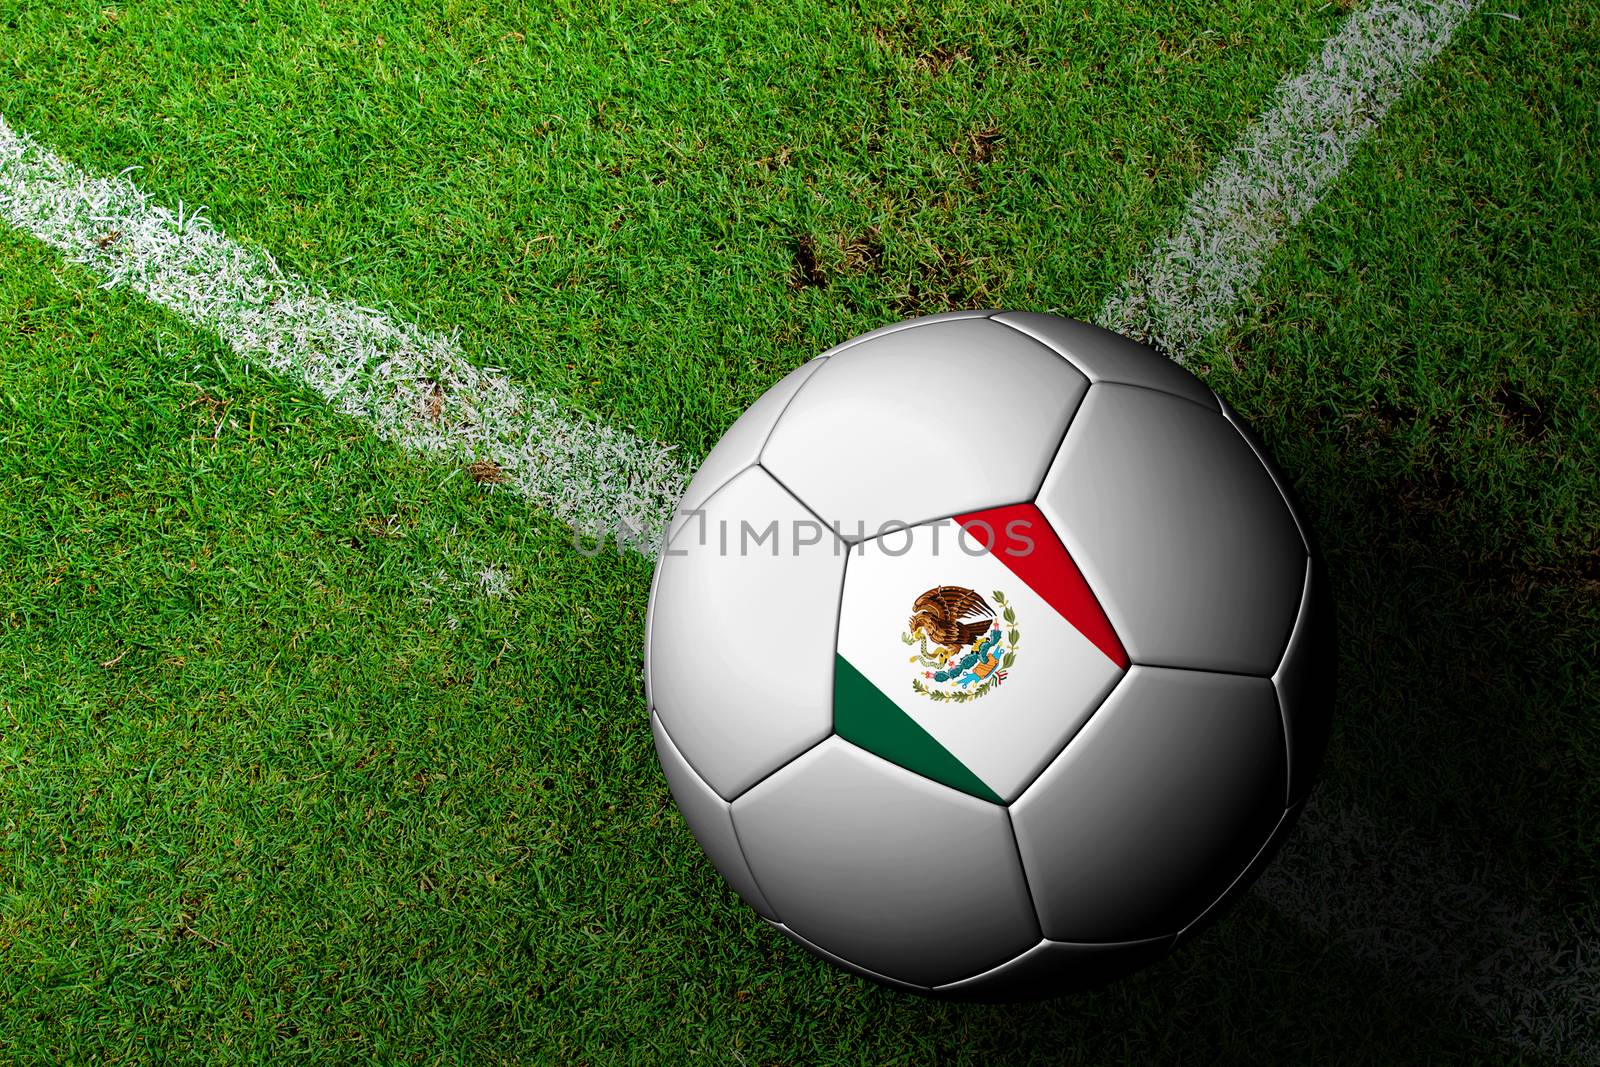 Mexico Flag Pattern of a soccer ball in green grass